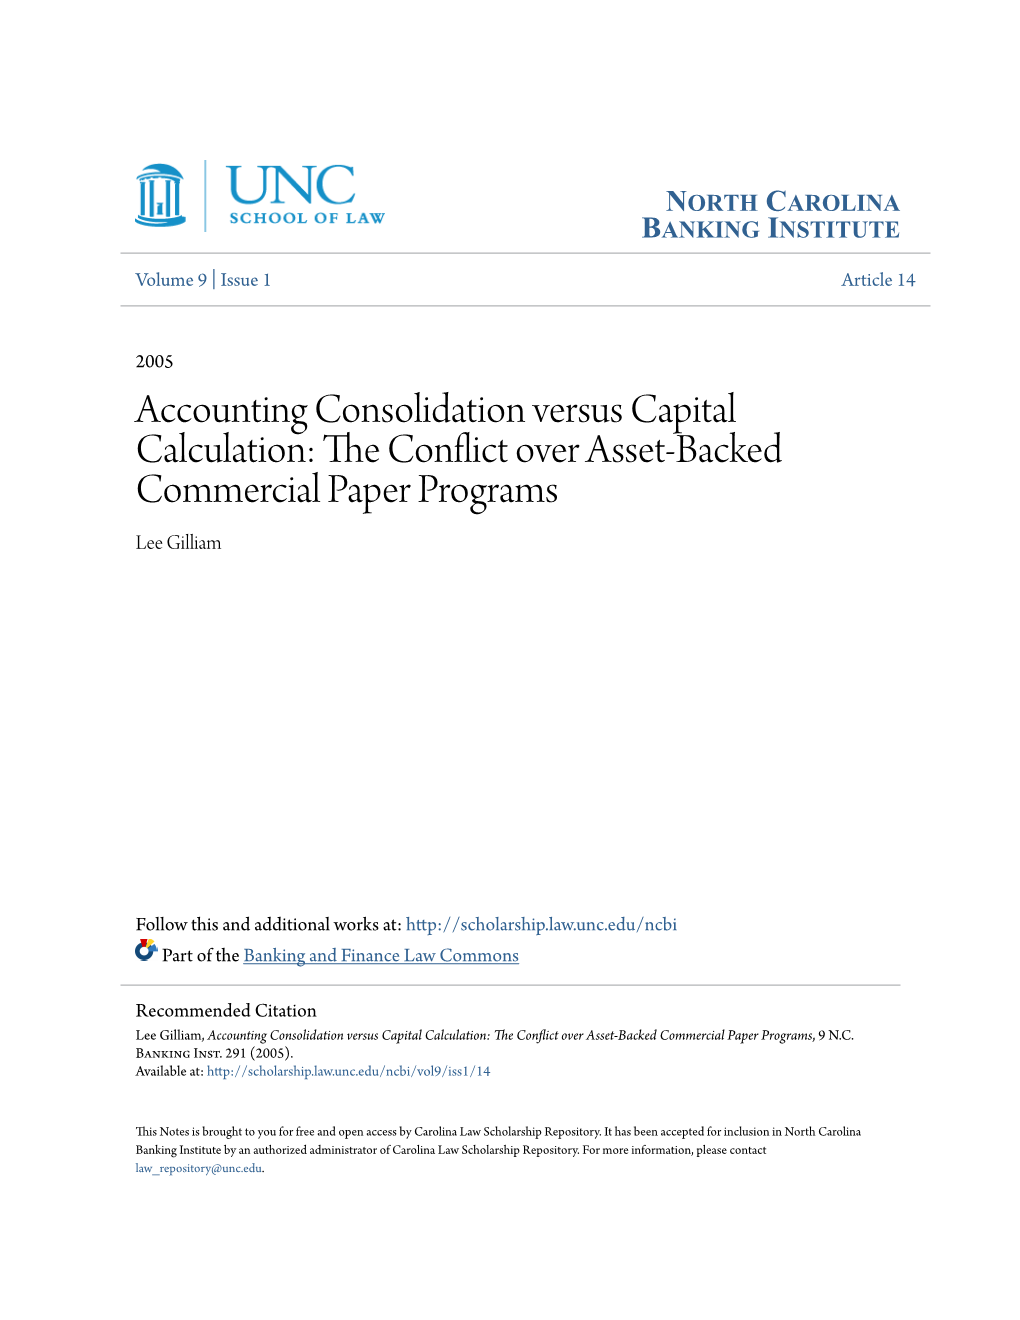 Accounting Consolidation Versus Capital Calculation: the Onflicc T Over Asset-Backed Commercial Paper Programs Lee Gilliam